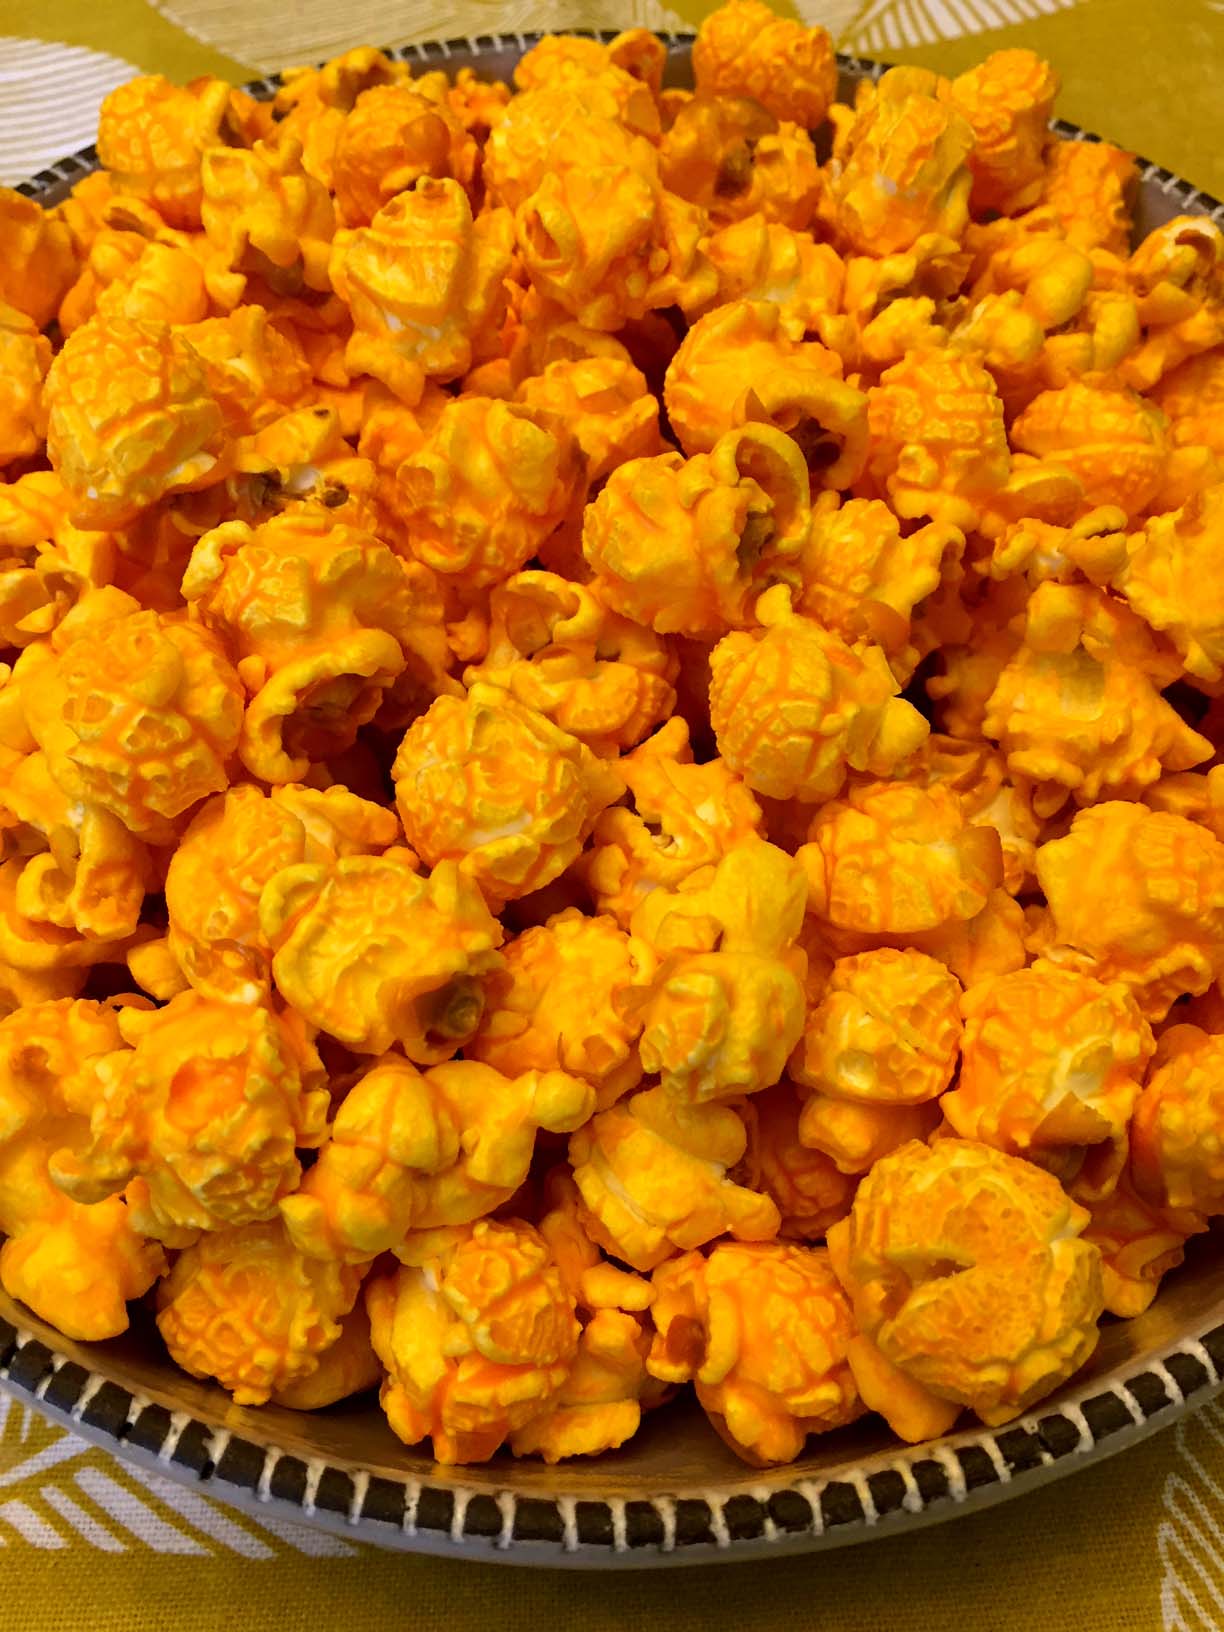 5 Things That Will Make You Love Pipcorn Cheddar Cheese Balls